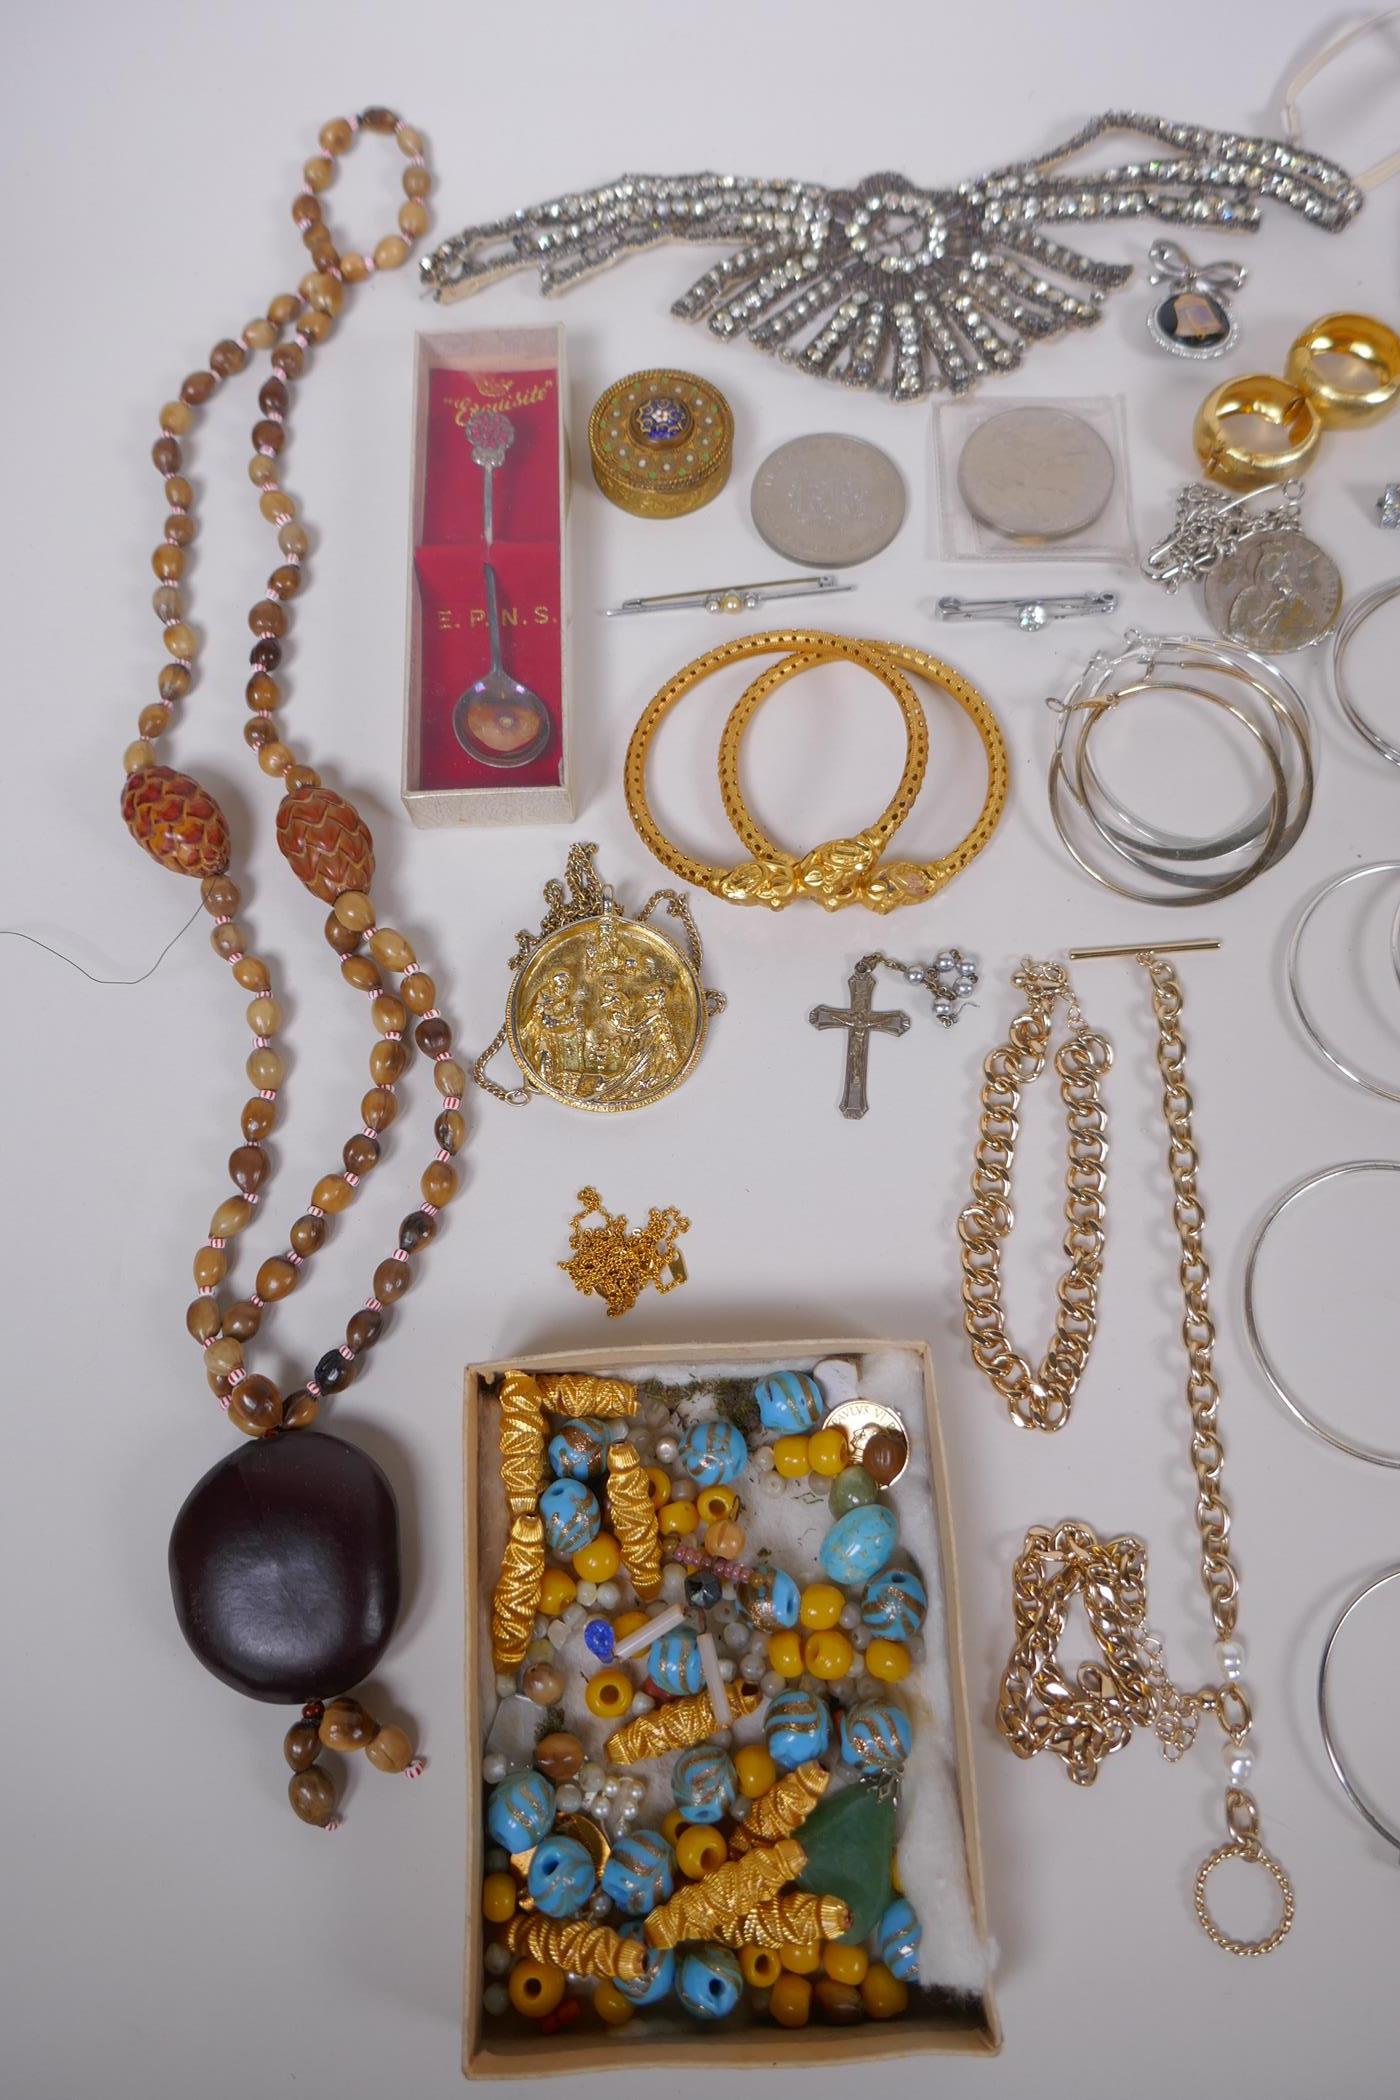 A quantity of vintage costume jewellery including a tiara, bangles, necklaces etc, together with a - Image 8 of 9